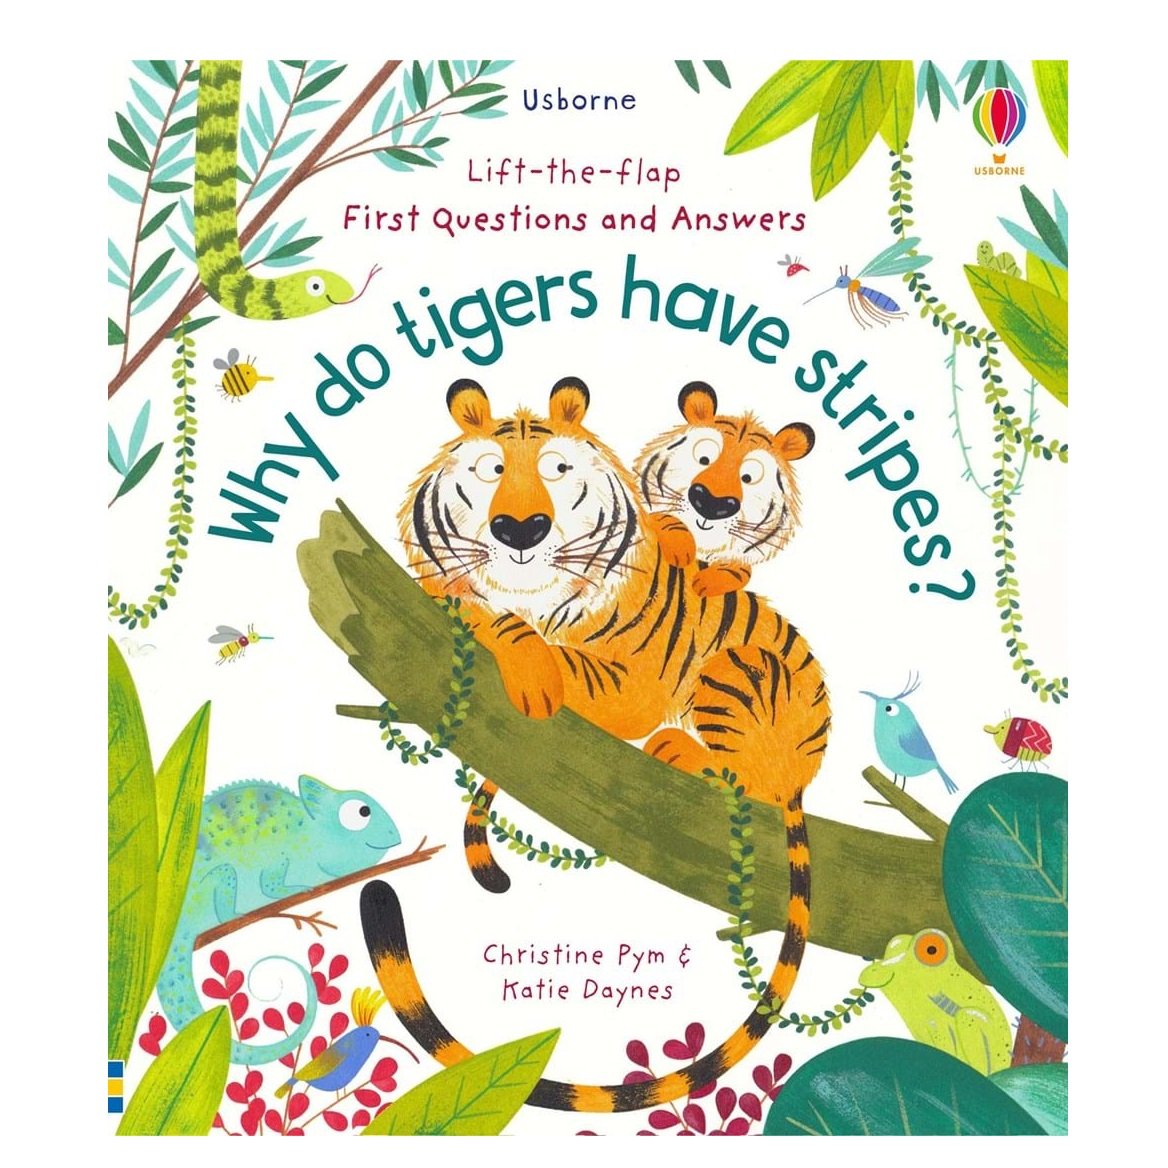 First Questions and Answers: Why Do Tigers Have Stripes? - Katie Daynes, англ. язык (9781474948197) - фото 1